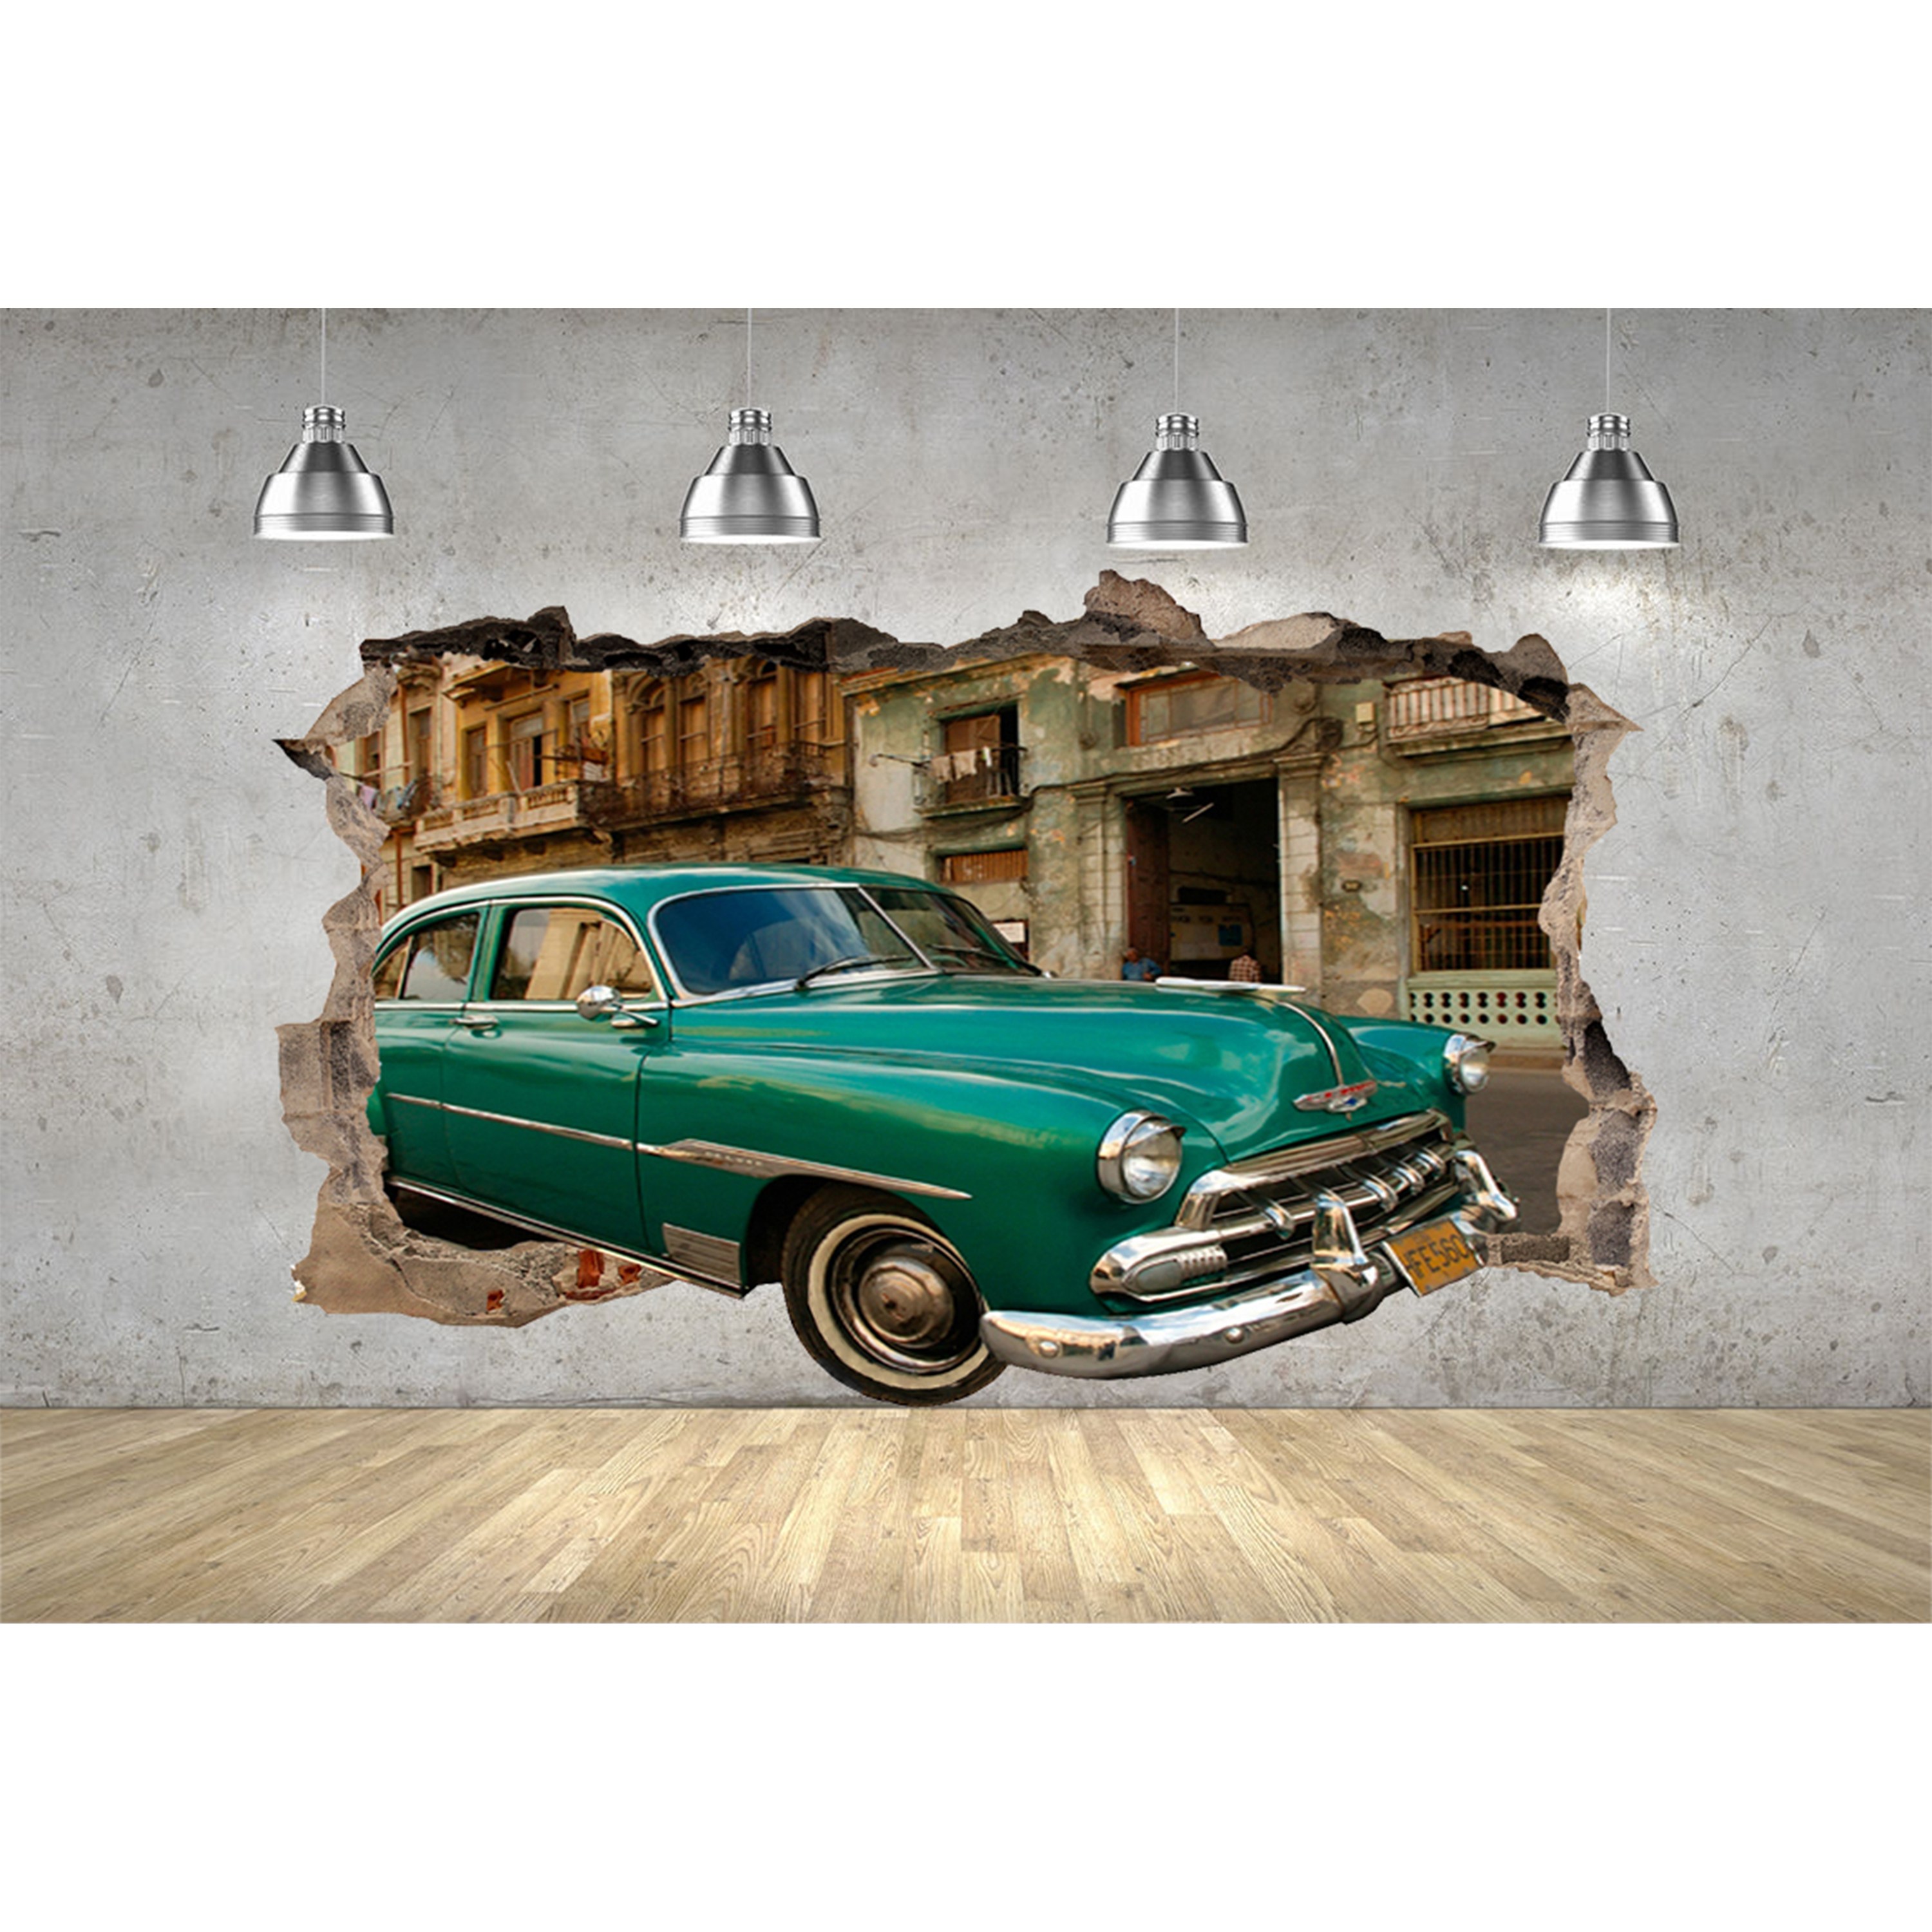 motorbike wallpaper for bedrooms,land vehicle,classic car,vehicle,car,antique car